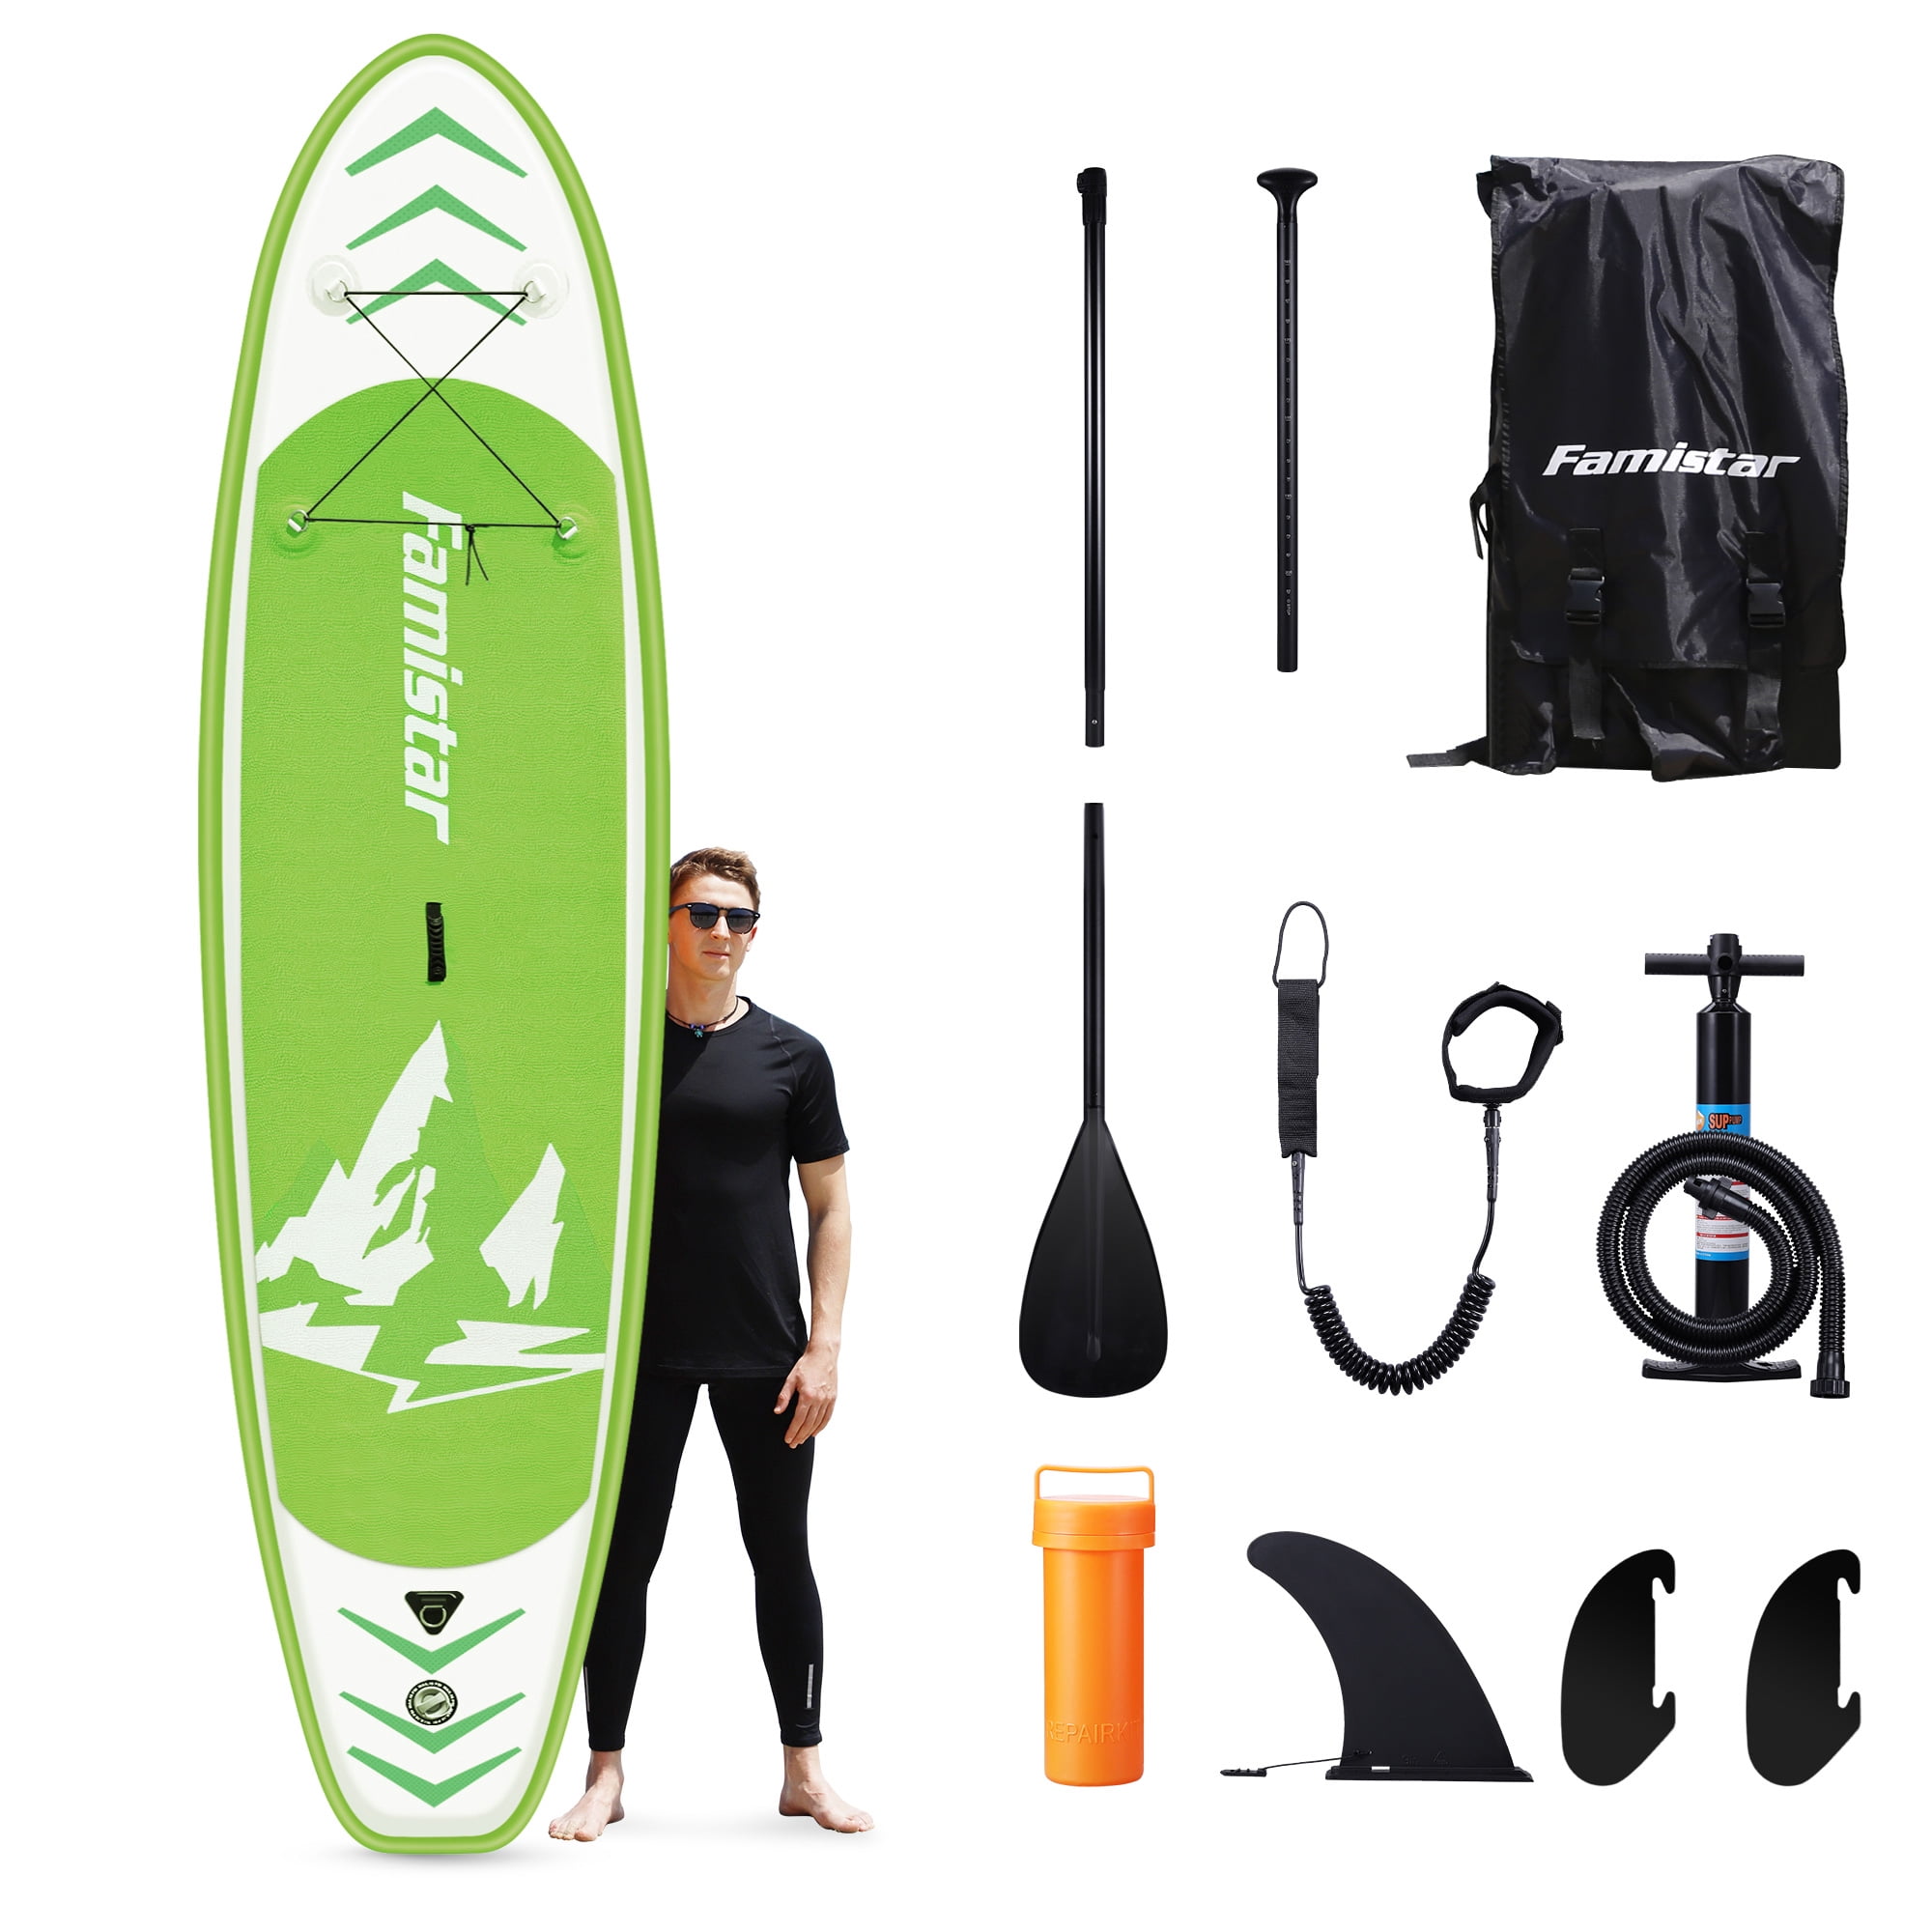 Famistar 10'10" Inflatable Stand Up Paddle Board SUP w/ 3 Fins, Adjustable Paddle, Pump & Carrying Backpack